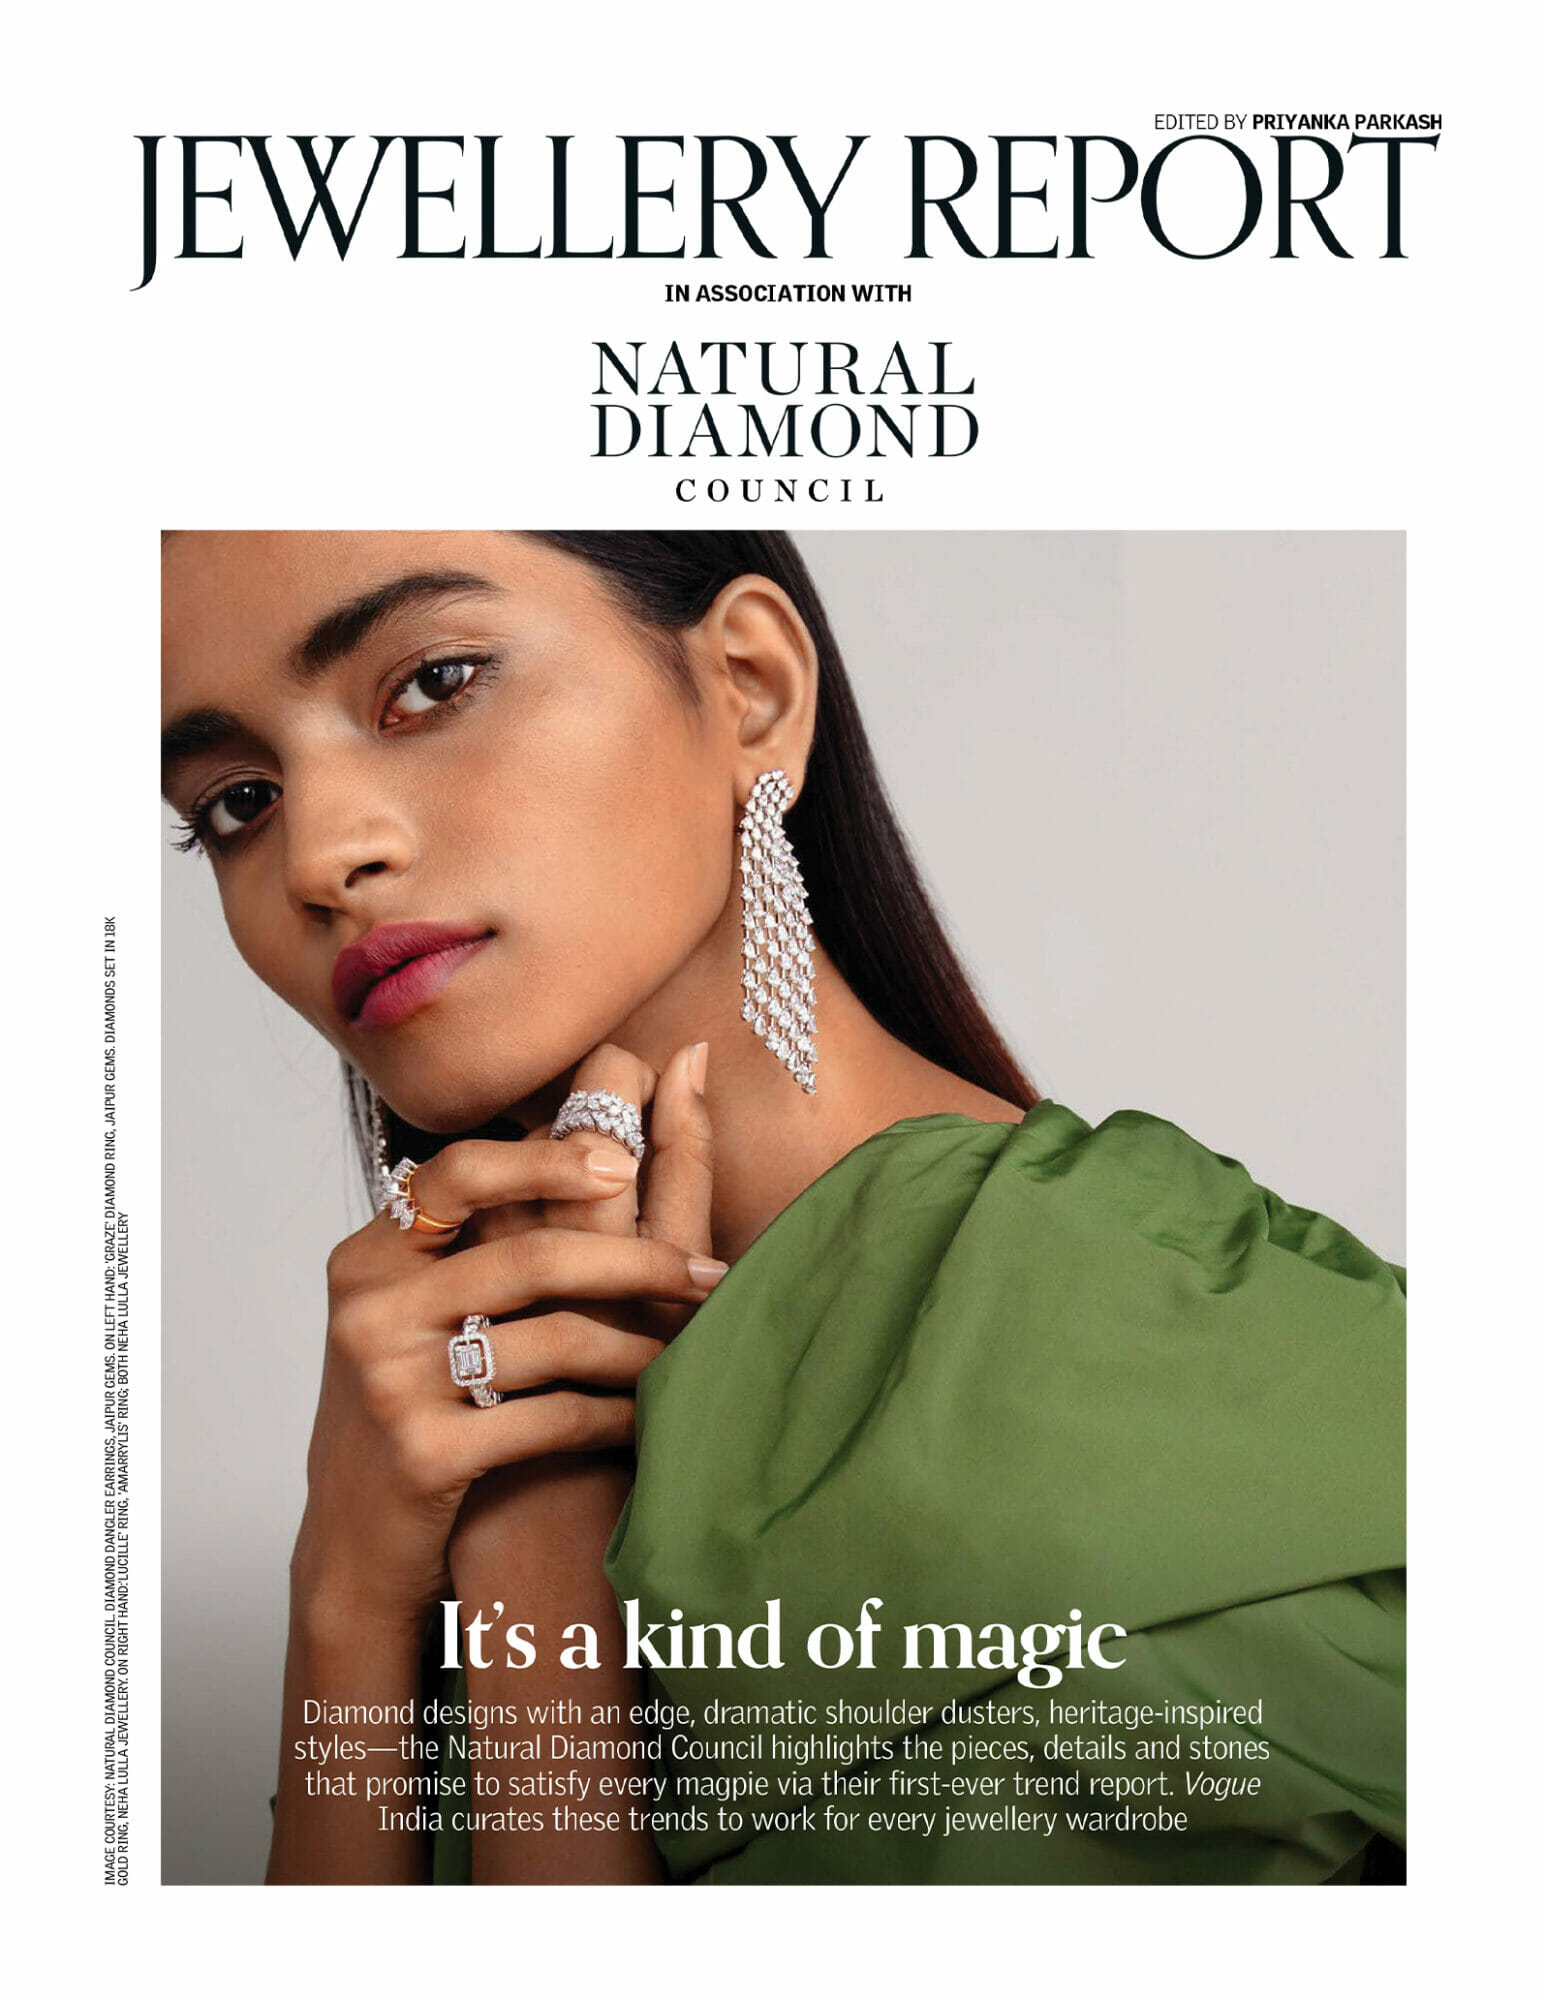 vogue-ndc-jewellery-trend-report-page-1